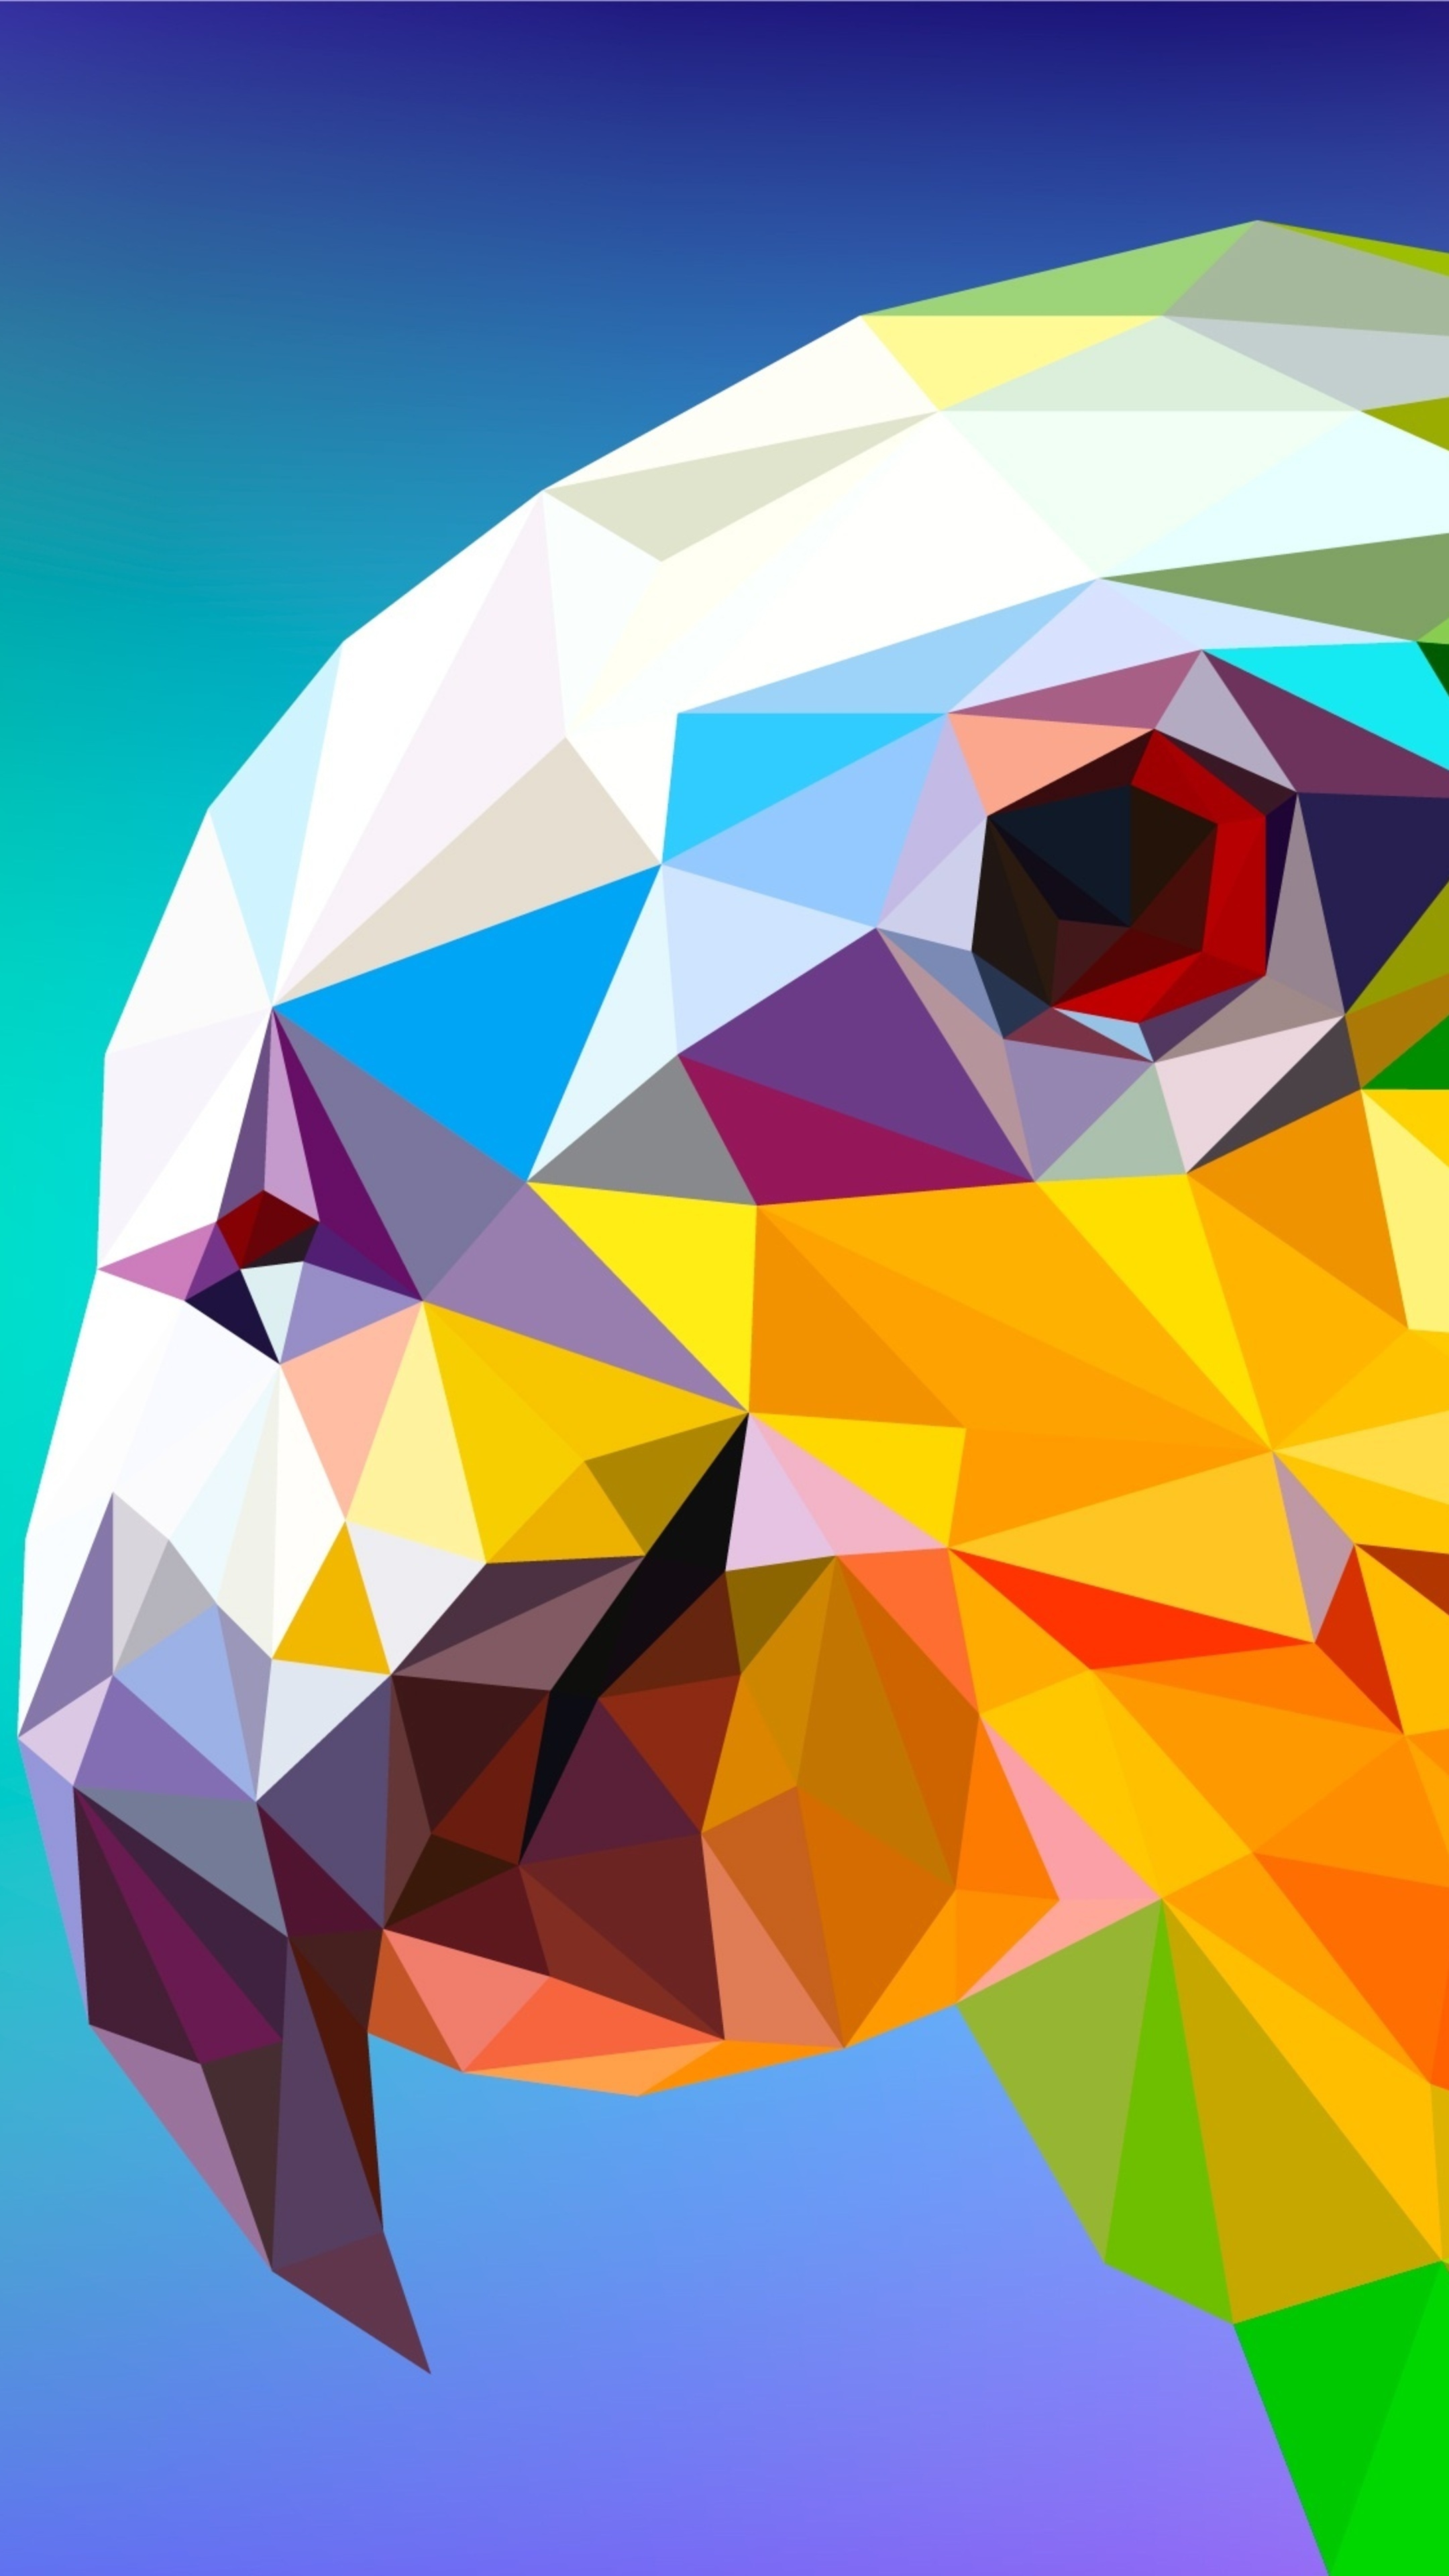 Parrot polygon facets, Sony Xperia wallpapers, Premium HD 4K, Striking bird imagery, 2160x3840 4K Phone